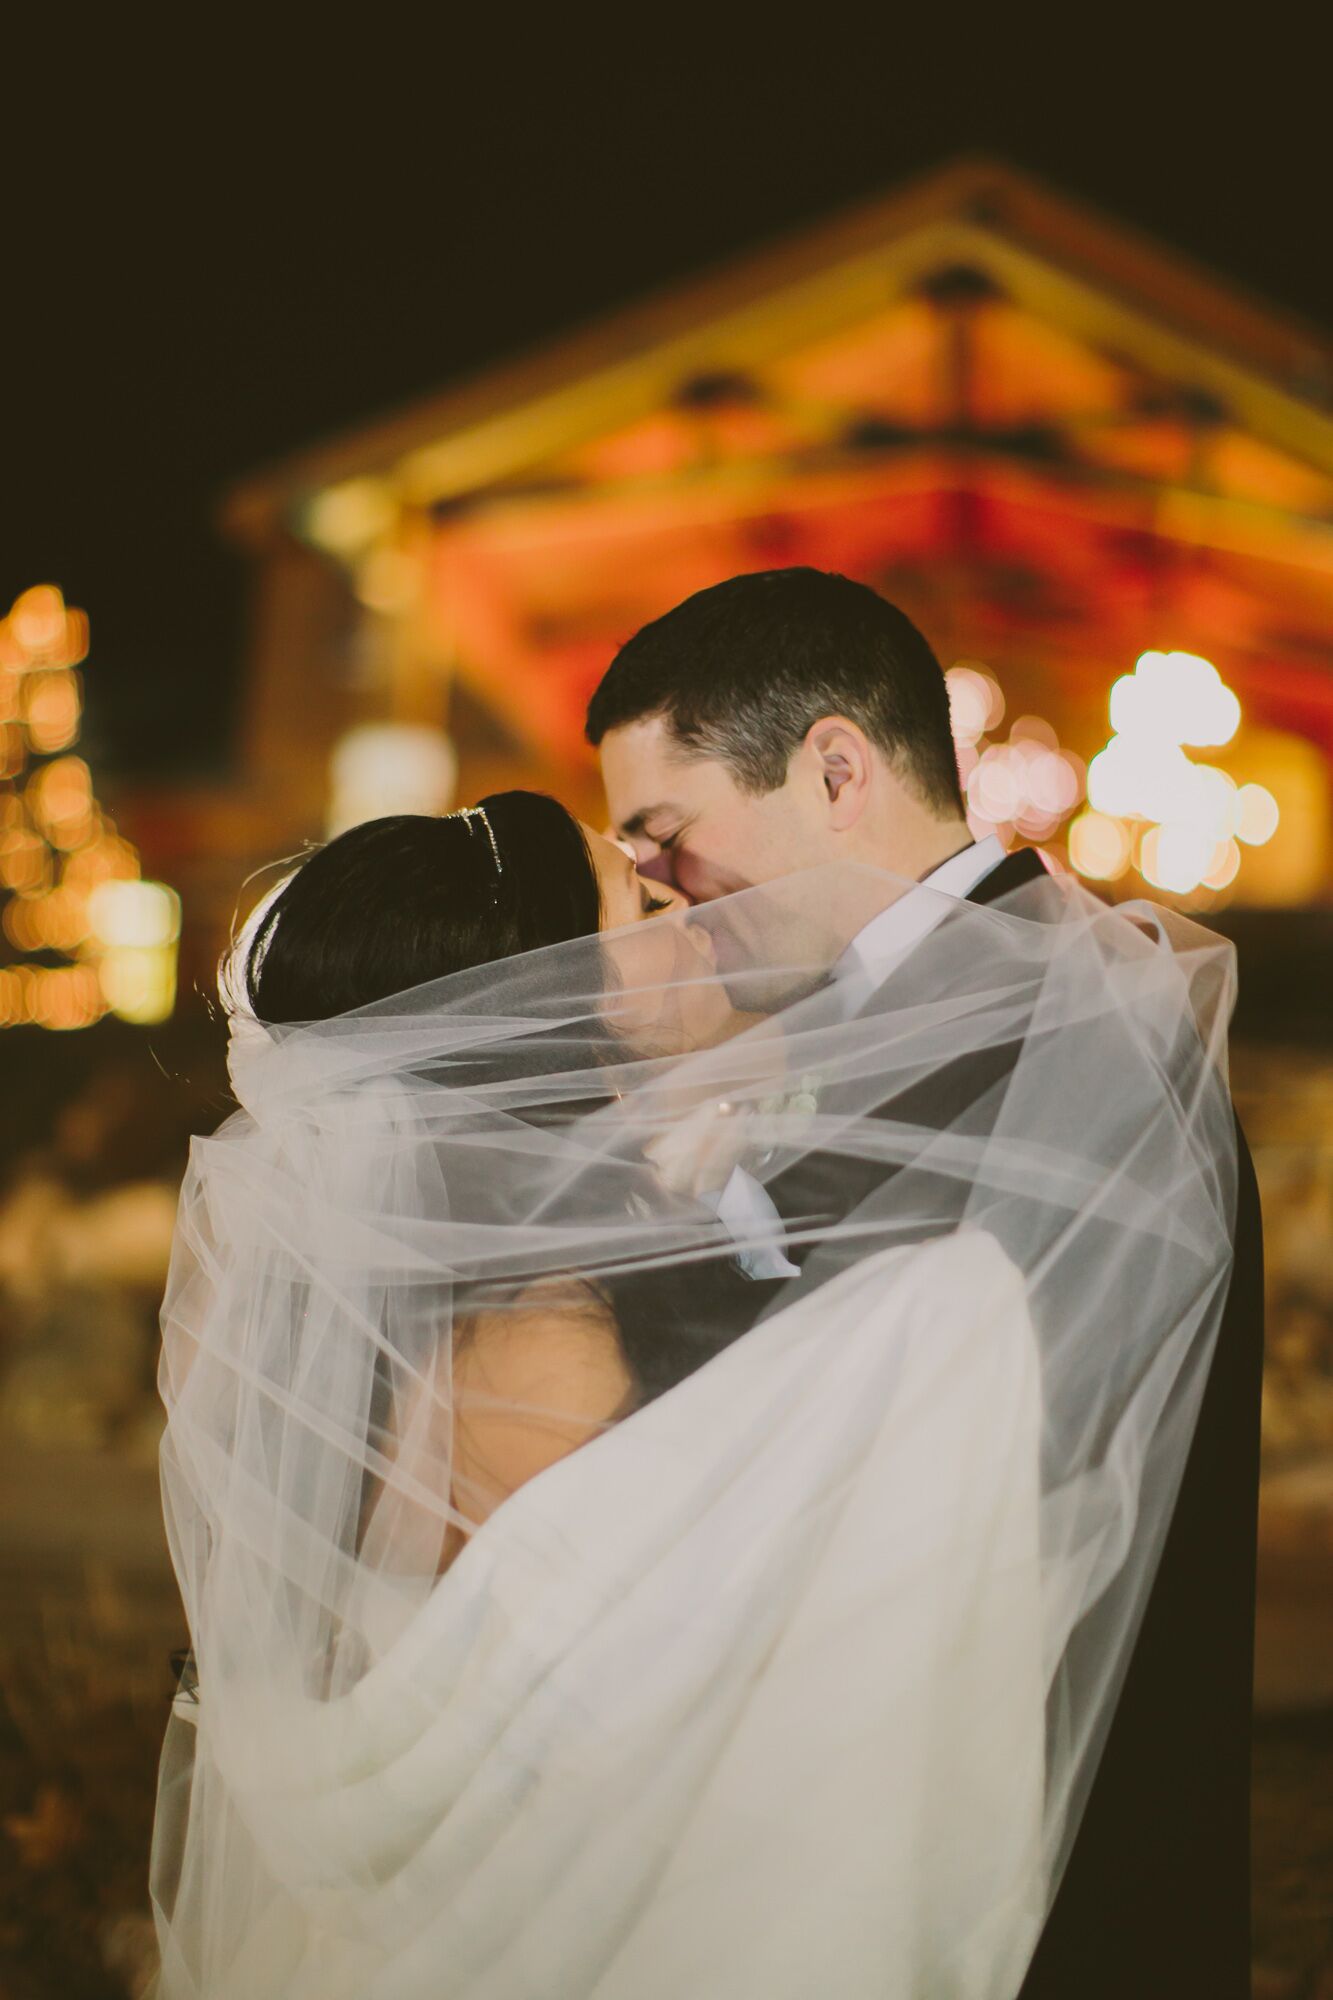 Groom And Bride In Long Veil Kiss Outside Tundra Lodge